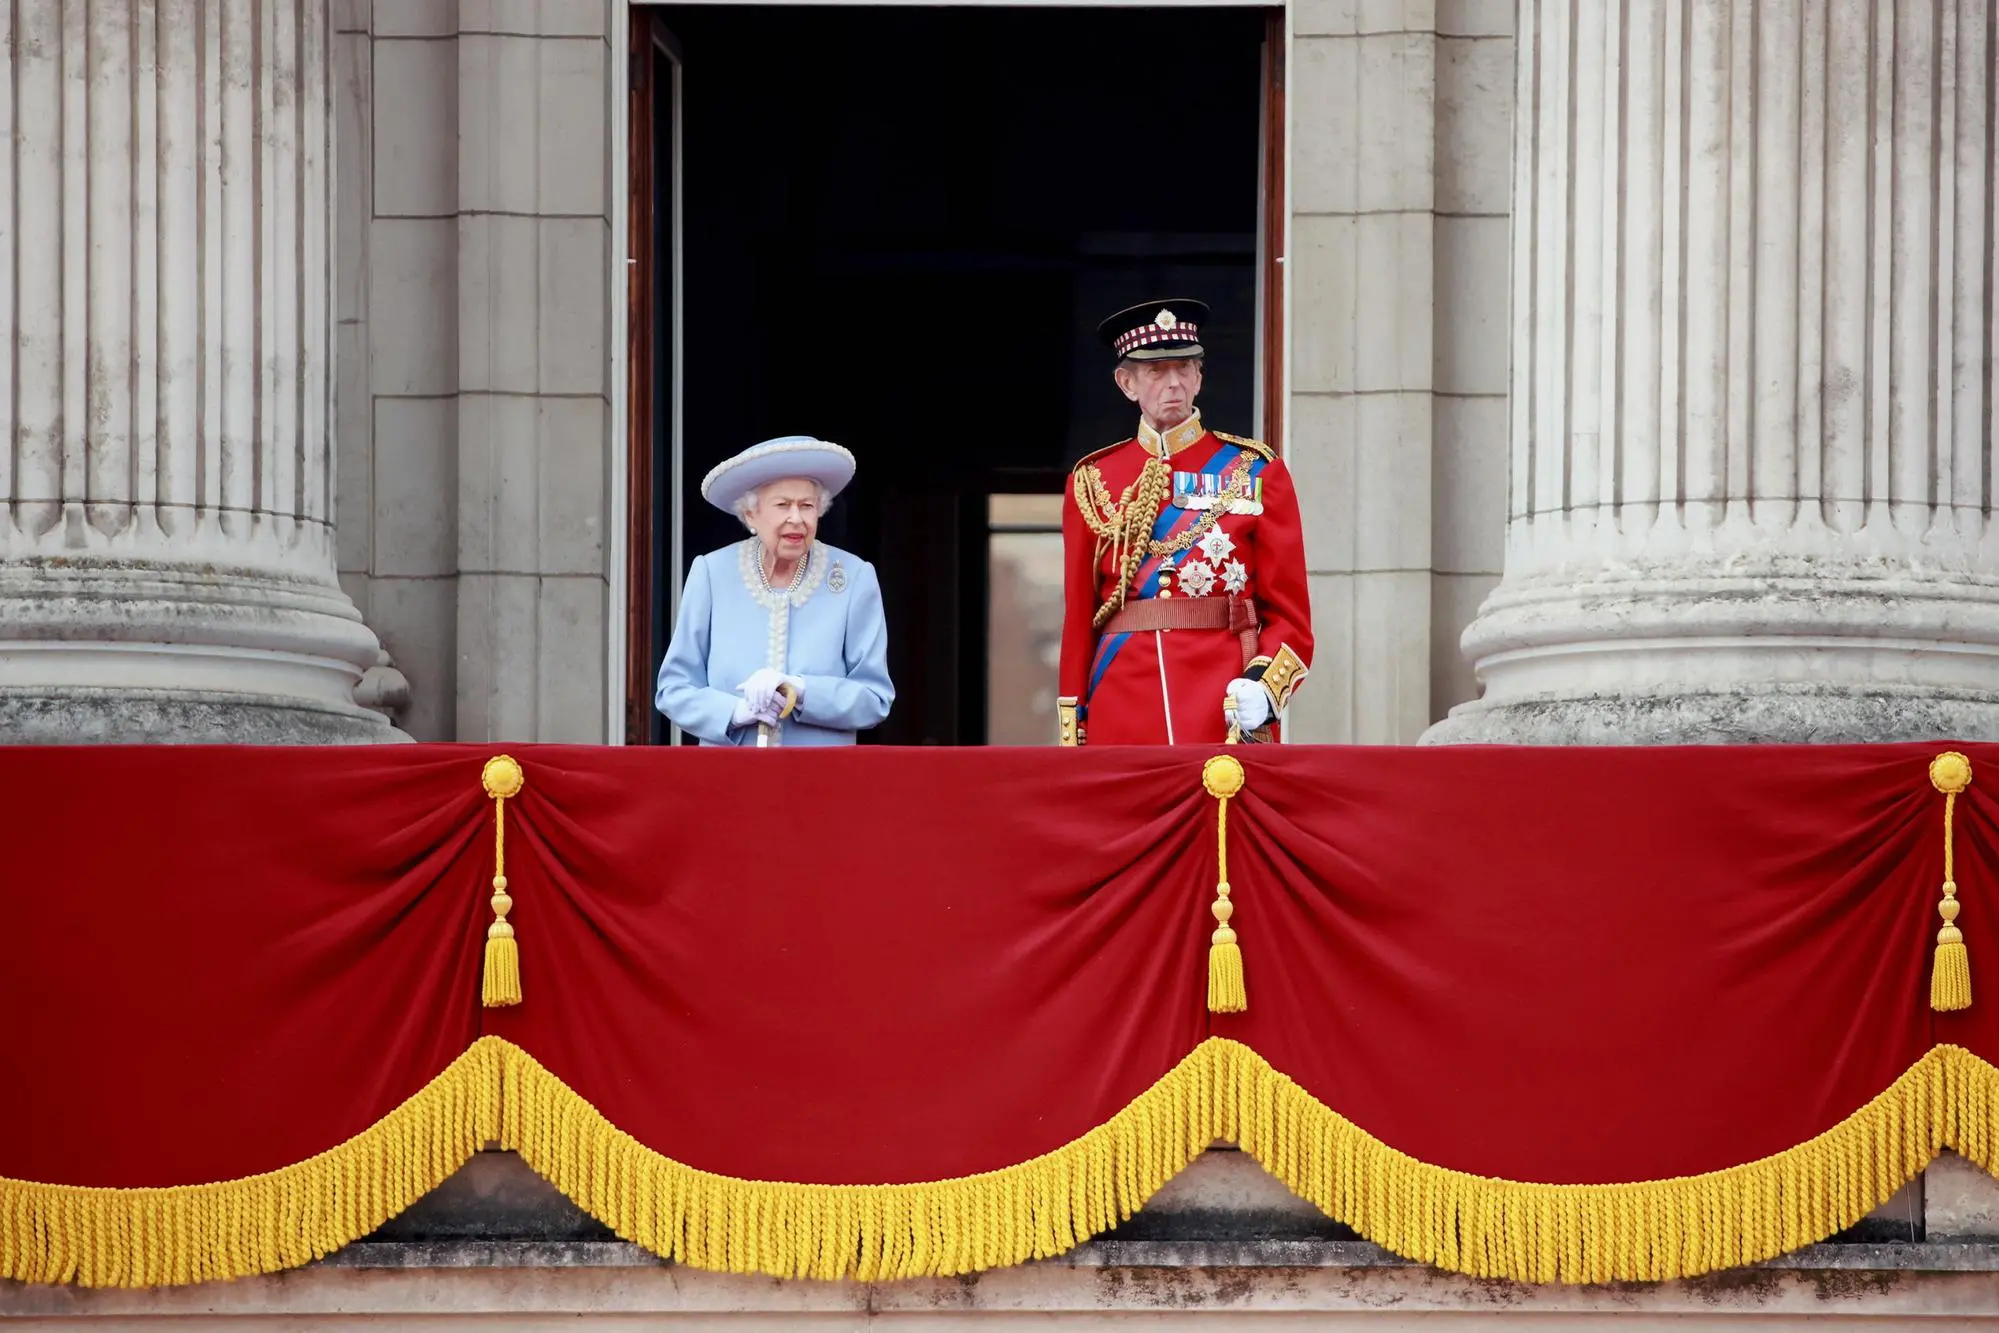 epa09991400 A handout picture provided by the British Ministry of Denece (MoD) shows Her Majesty The Queen (L) and His Royal Highness The Duke of Kent (R) on the balcony of Buckingham Palace during the 'Trooping of the Colour' parade in London, Britain, 02 June 2022. Britain is enjoying a four day holiday weekend to celebrate Queen Elizabeth II's Platinum Jubilee marking the 70th anniversary of her accession to the throne on 06 February 1952. EPA/Sgt Donald C Todd/BRITISH MINISTRY OF DEFENCE/HANDOUT MANDATORY CREDIT: MOD/CROWN COPYRIGHT HANDOUT EDITORIAL USE ONLY/NO SALES